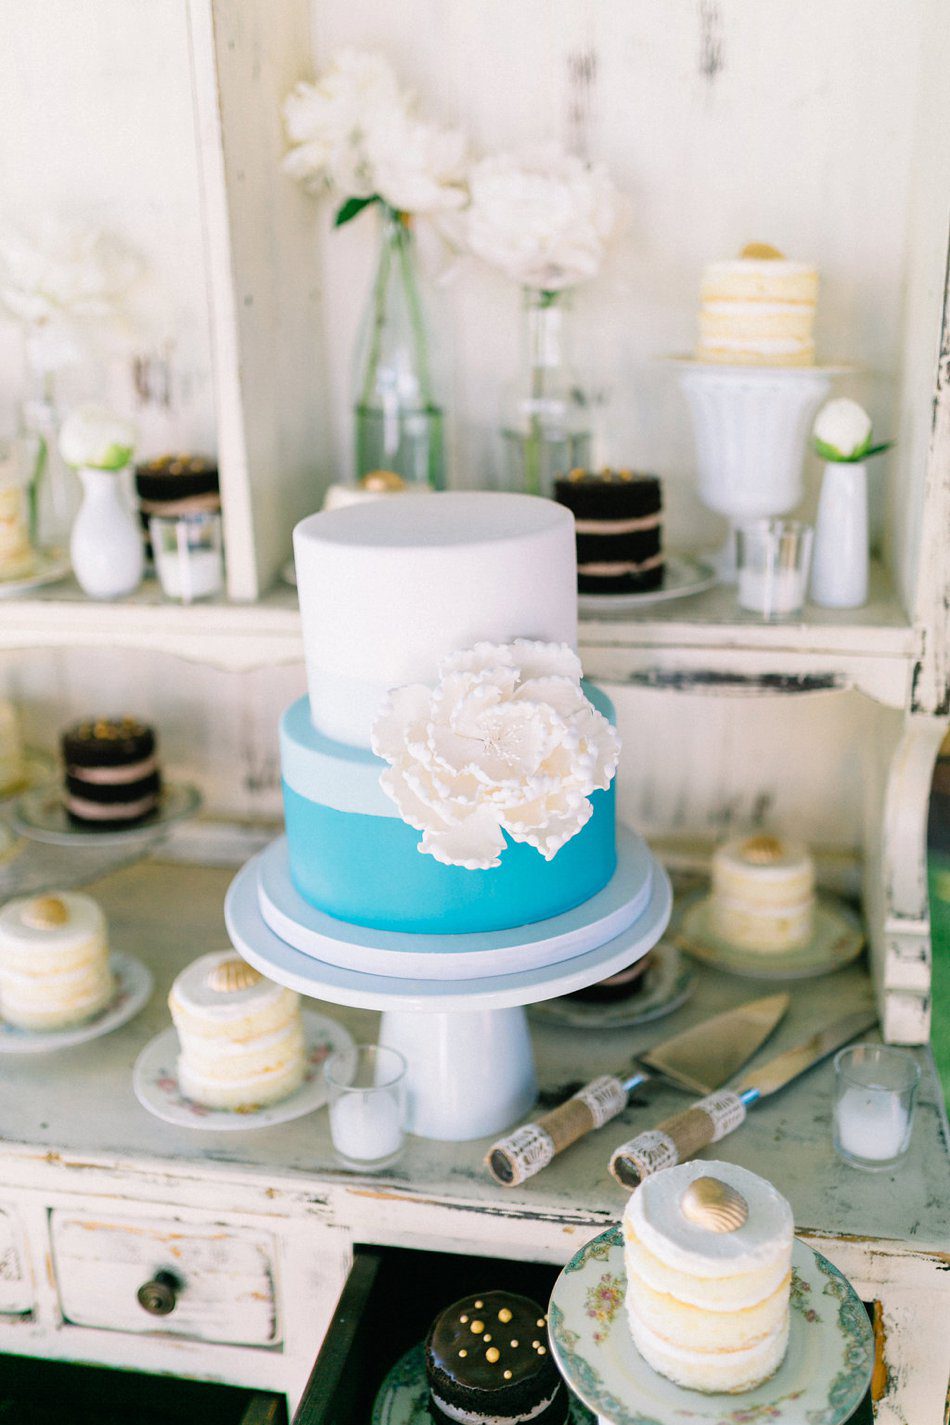 Blue and white wedding cake with giant flower created by Hands on Sweets in Tampa FL. Destination wedding at the Postcard Inn on the Beach by Catherine Ann Photography